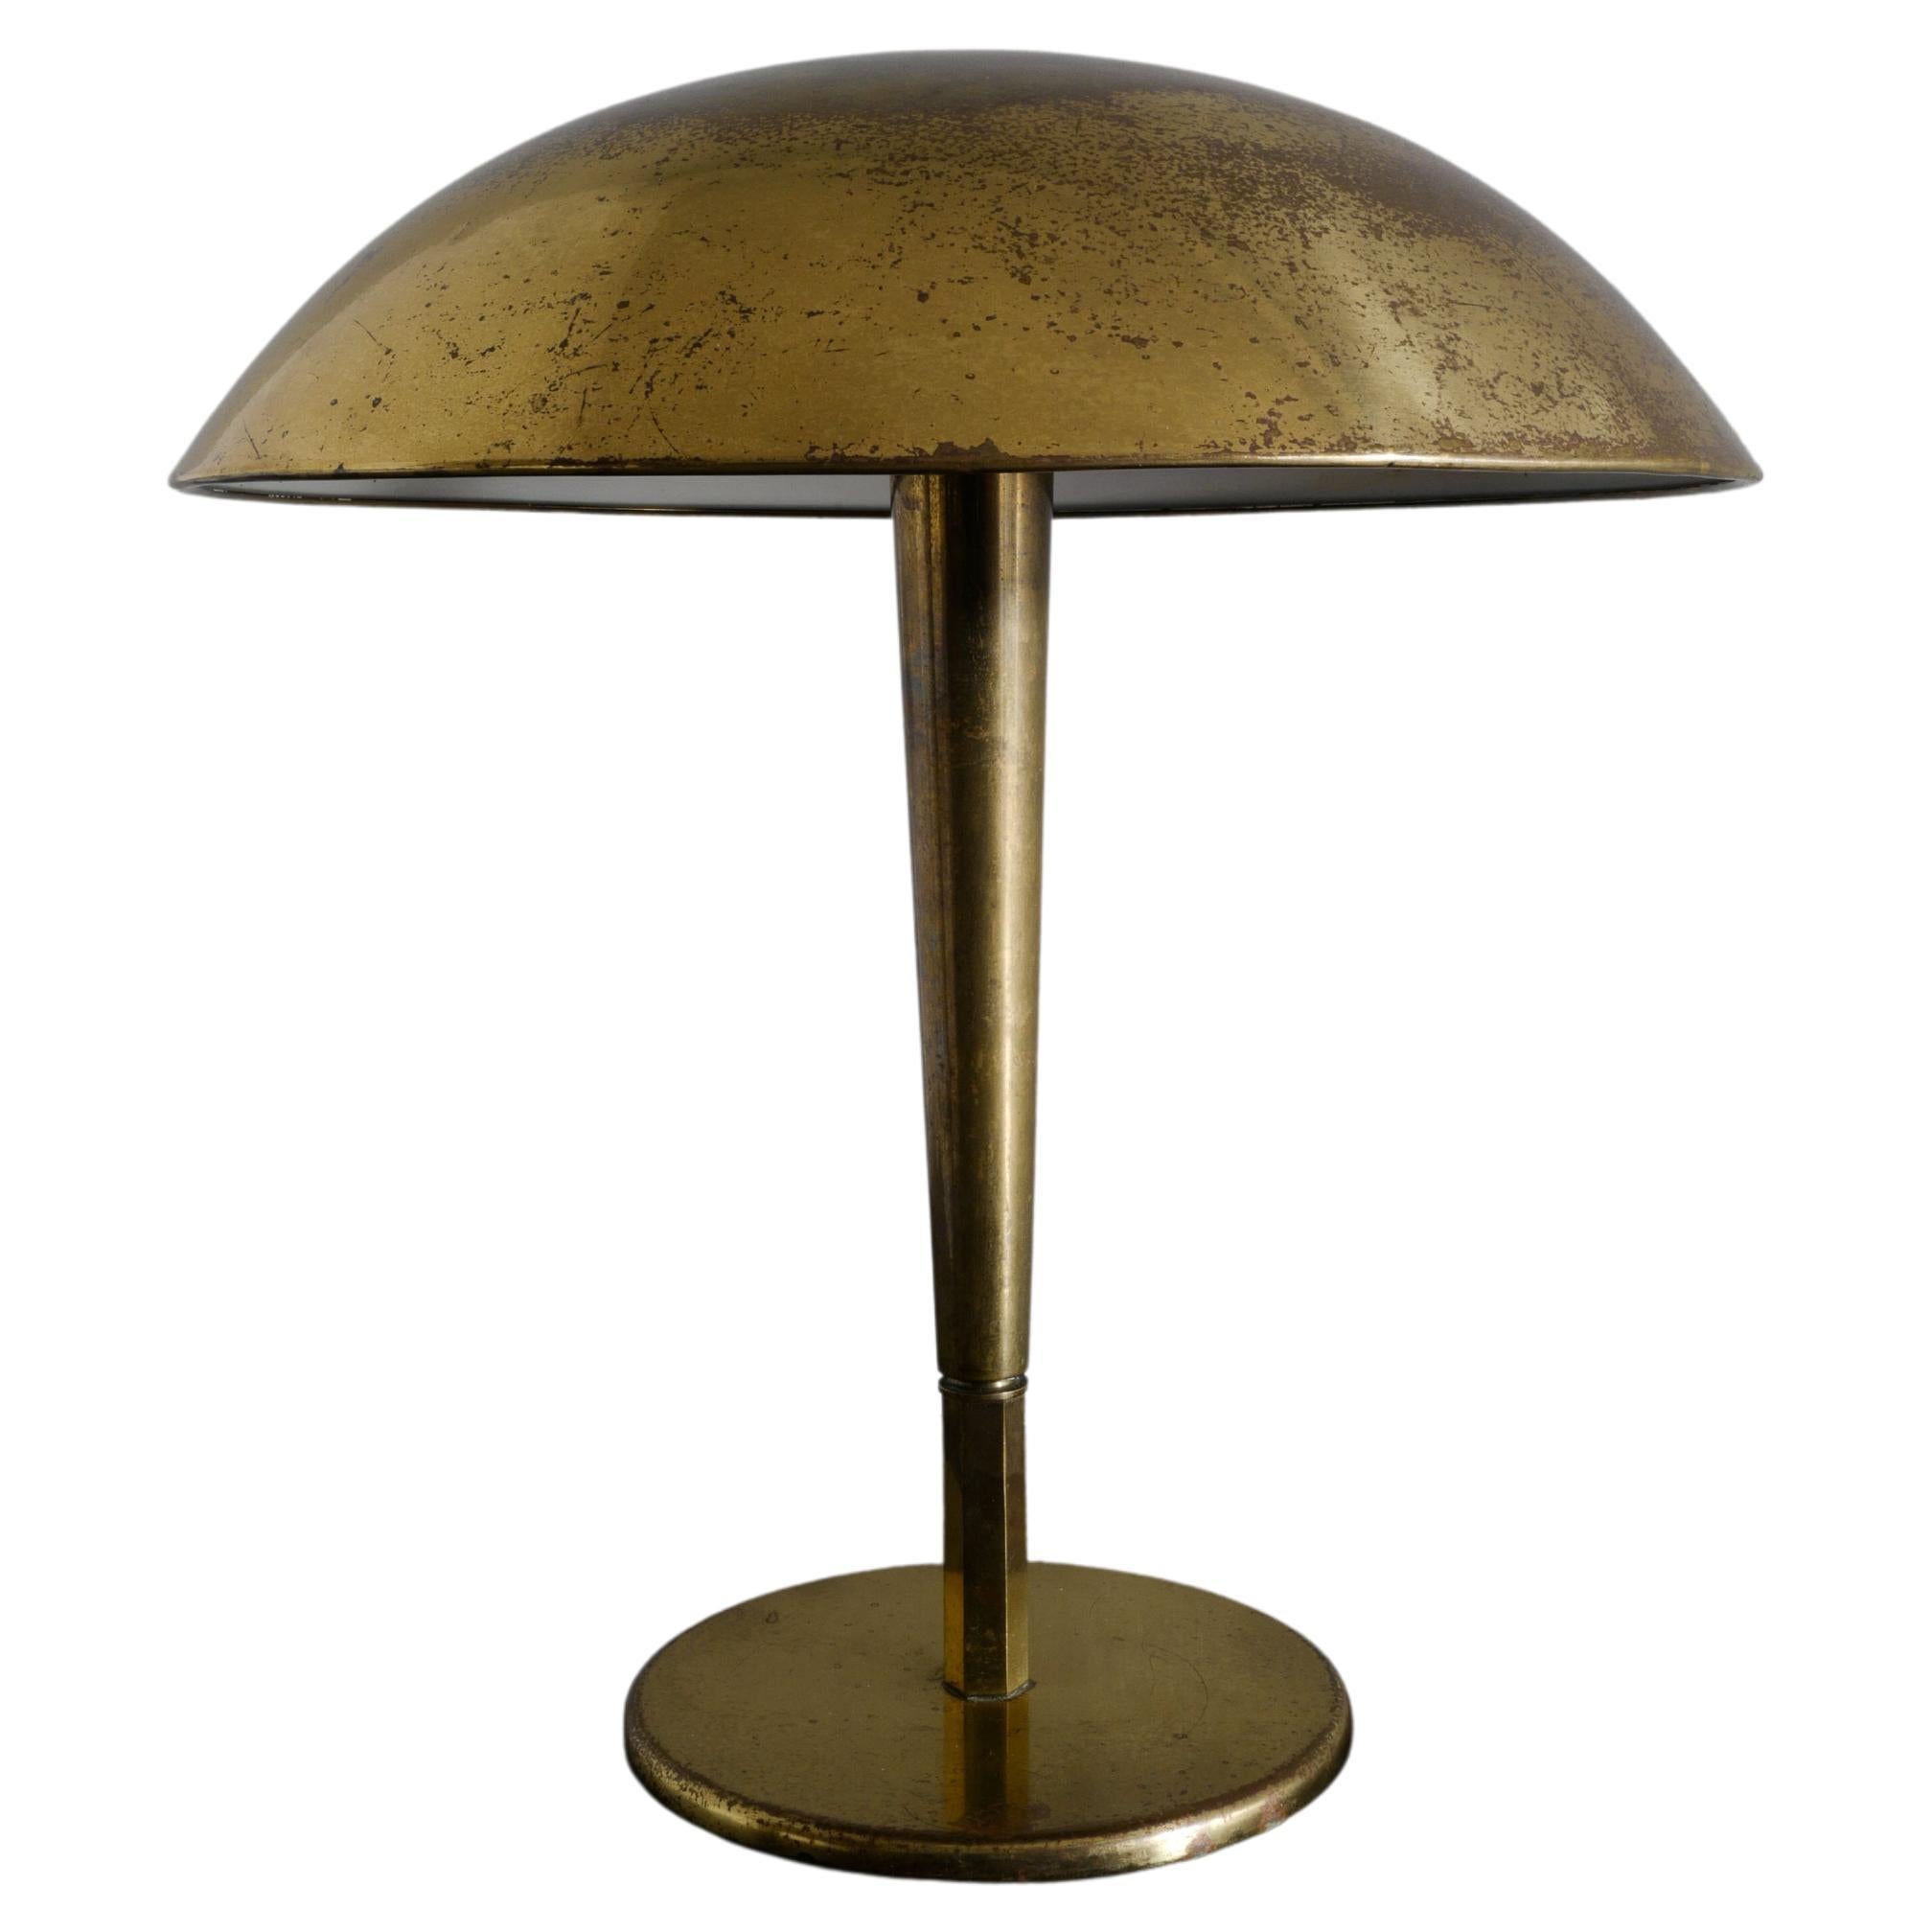 Paavo Tynell "5061" Mid-Century Table Desk Lamp in Brass Produced by Taito 1940s